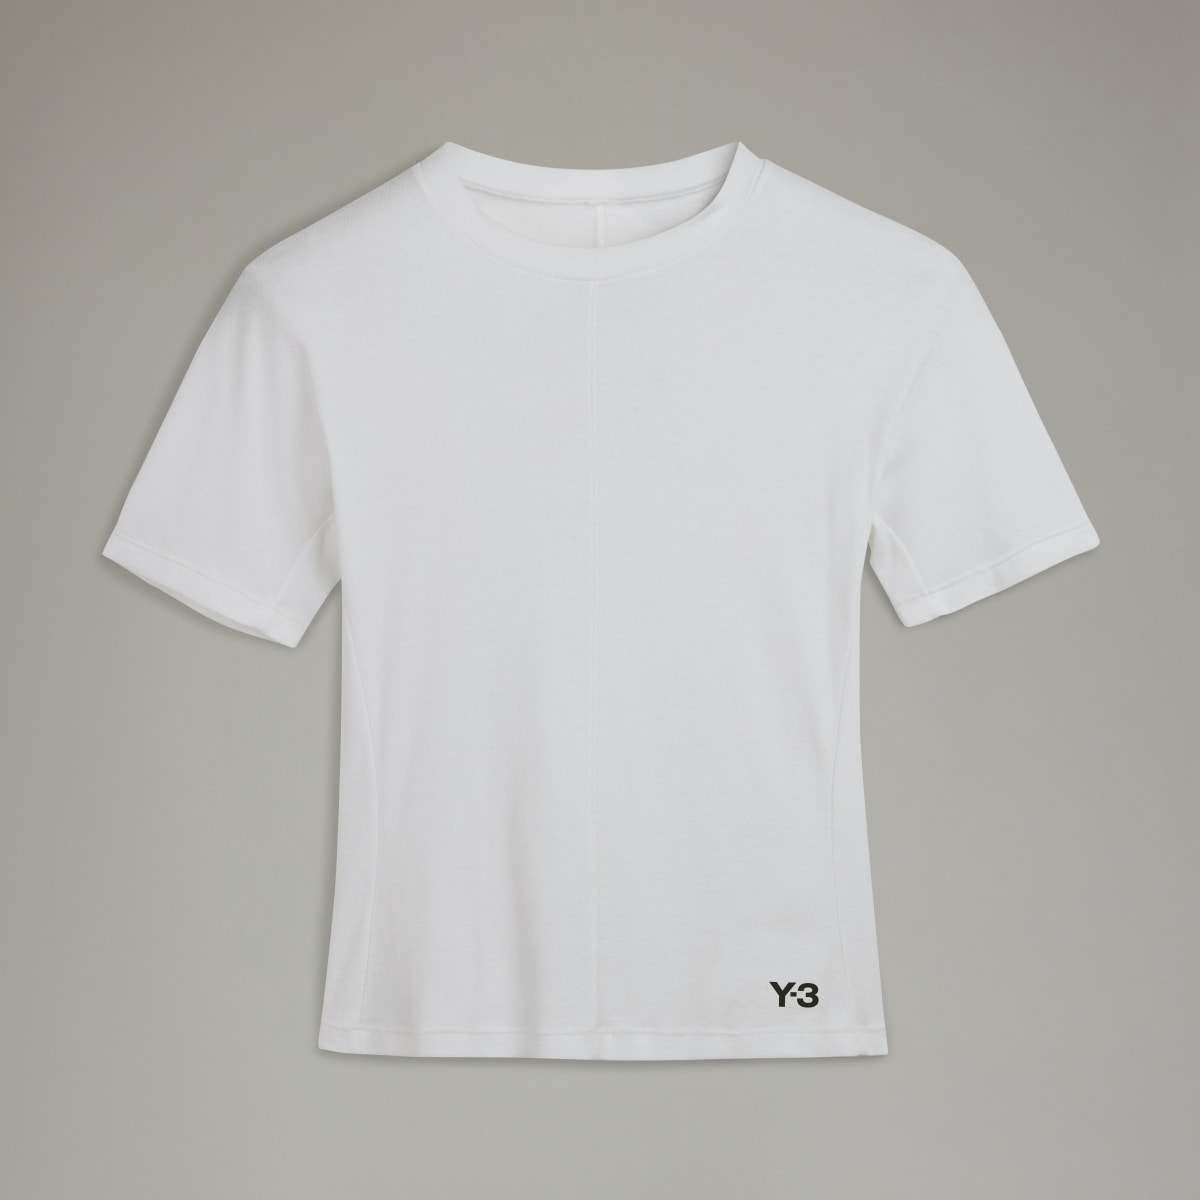 Adidas Y-3 Fitted Short Sleeve Tee. 5